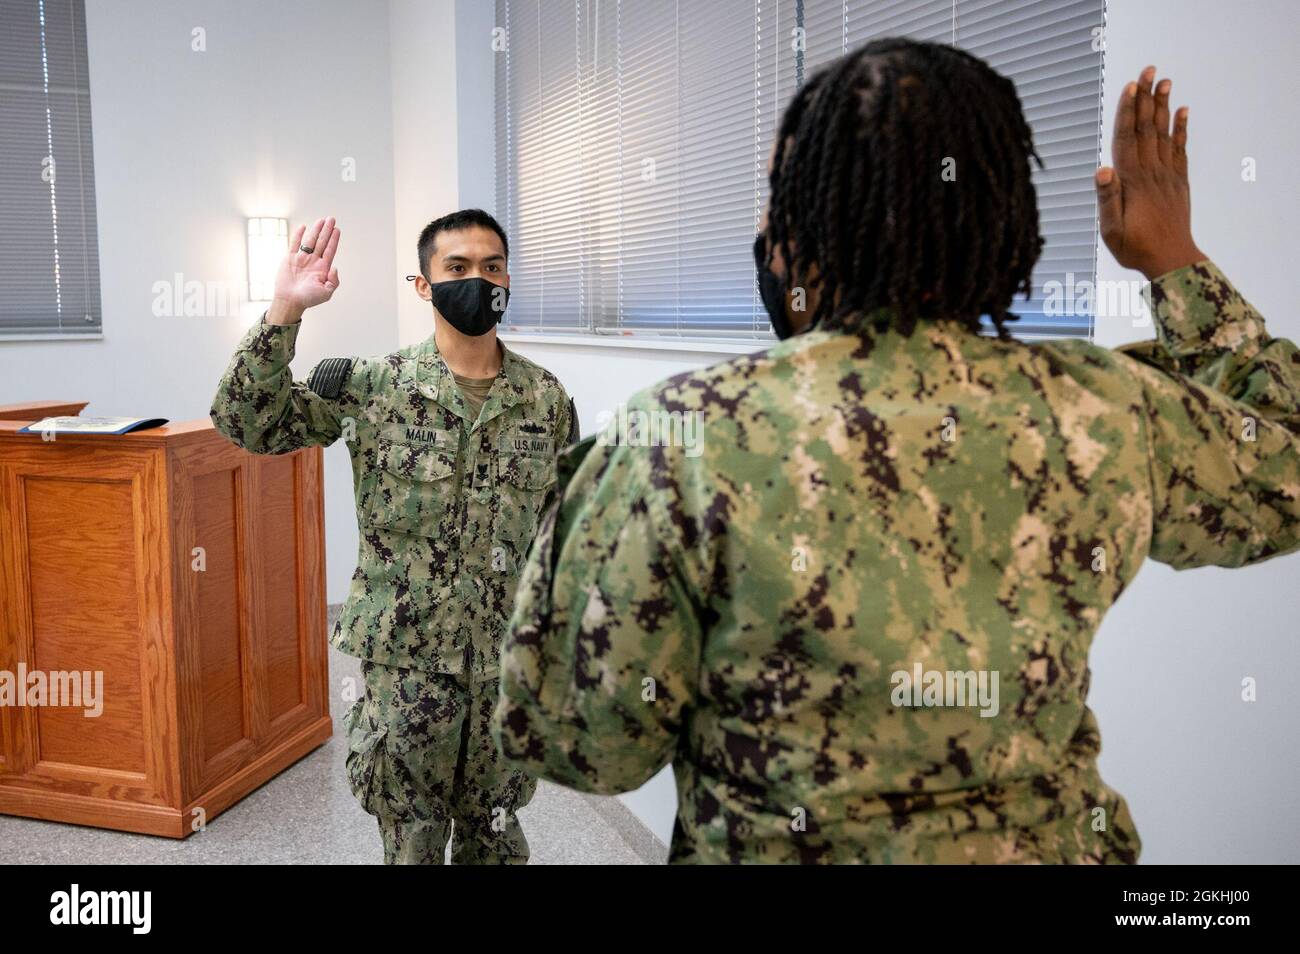 WASHINGTON, DC (April 23, 2021) – Religious Program Specialist 2nd Class Arvin Malin recites the oath of enlistment during a ceremony onboard Washington Navy Yard. Stock Photo